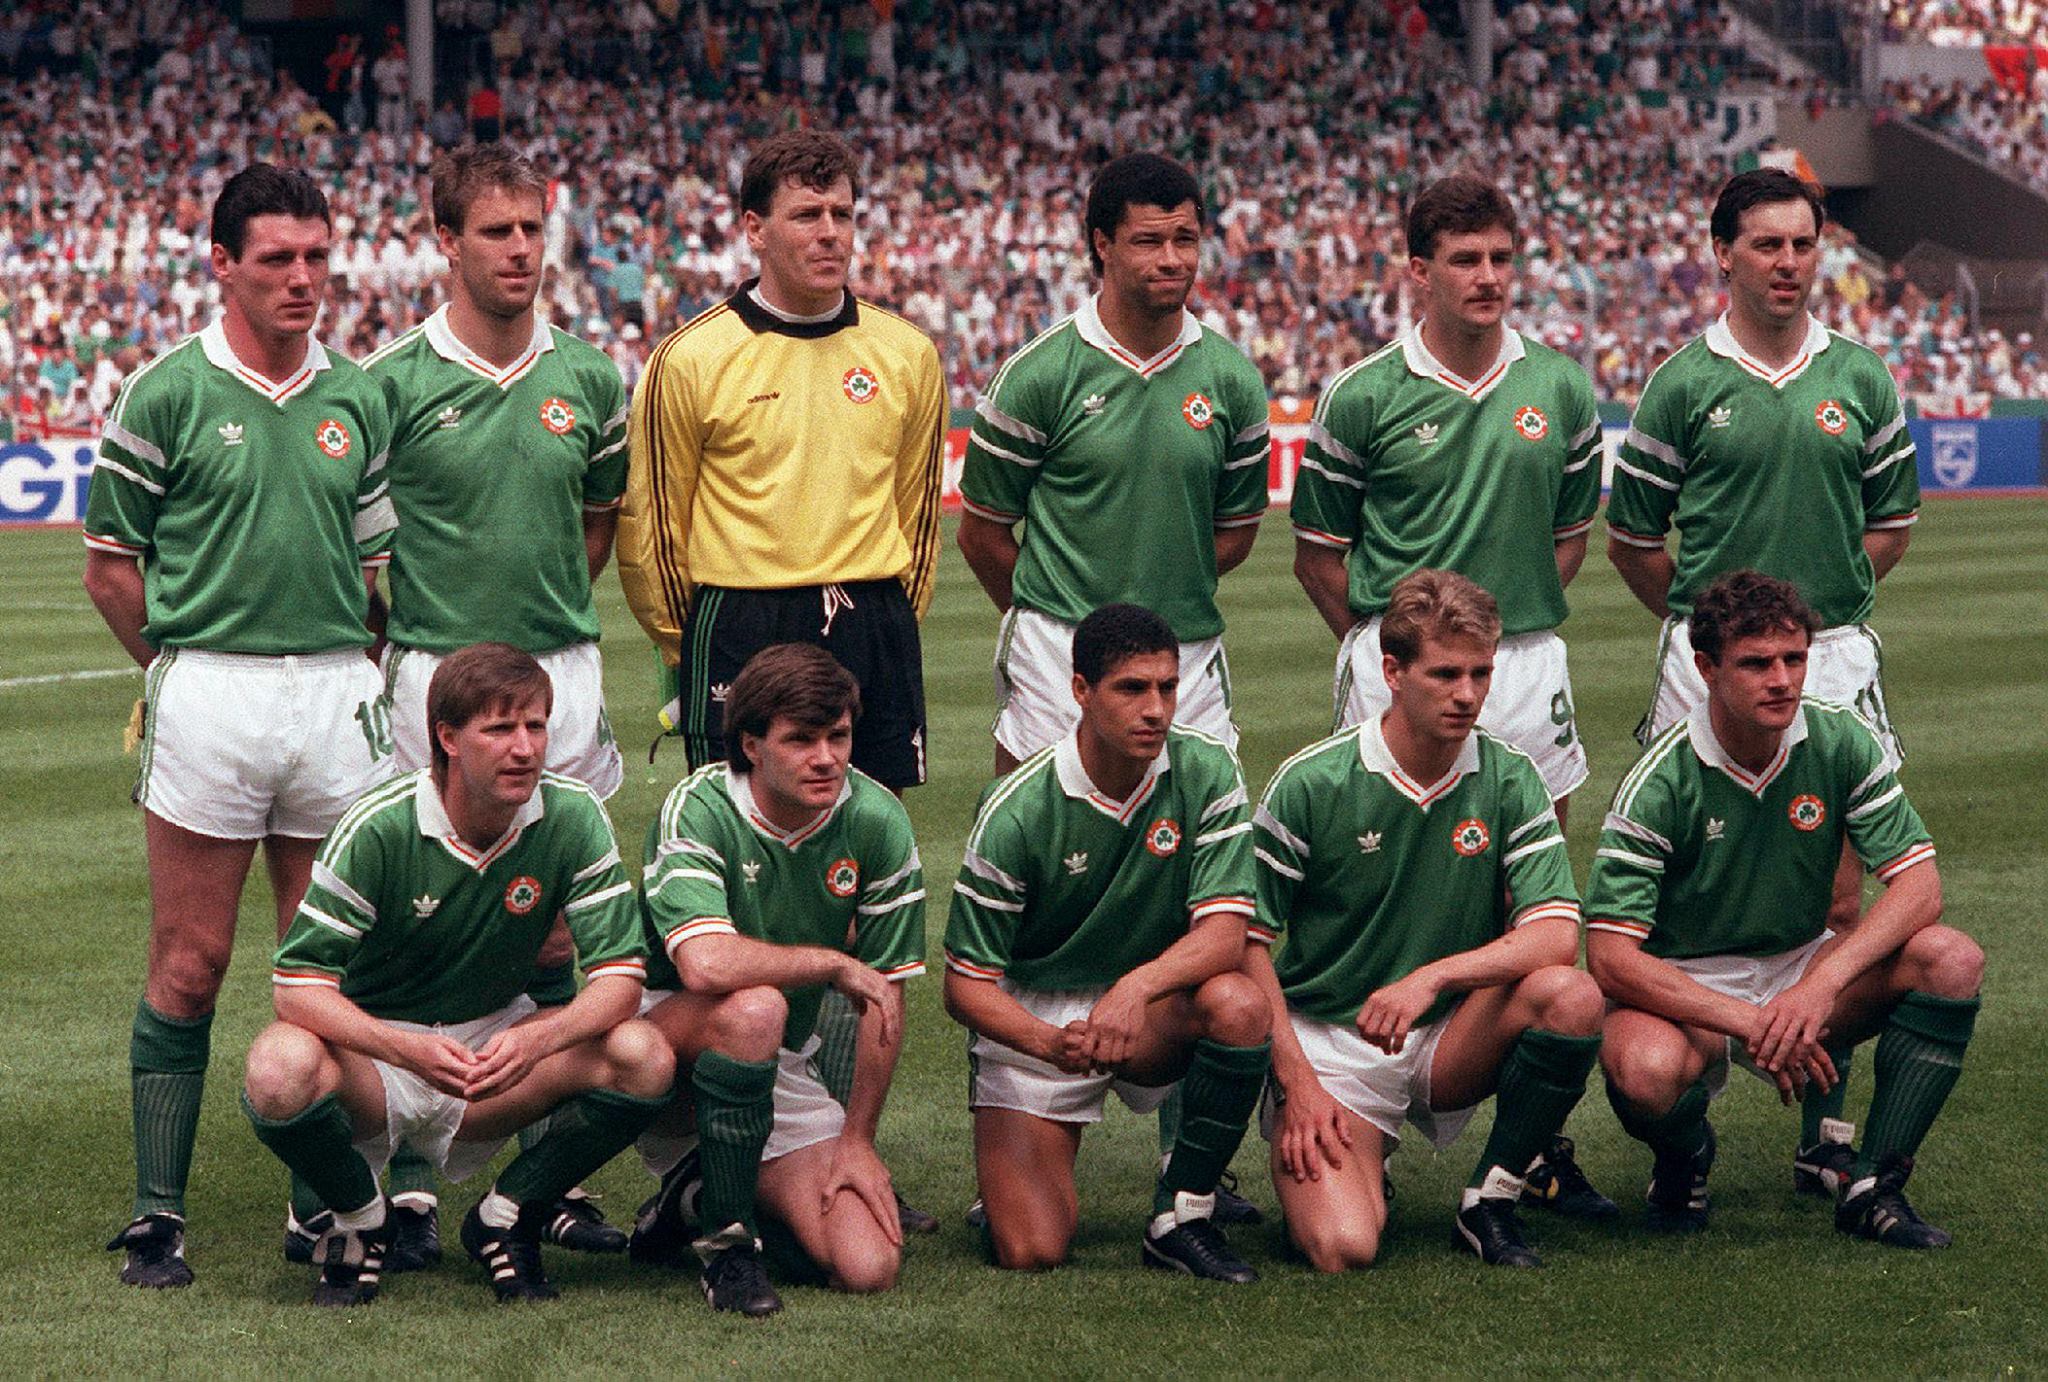 The Republic of Ireland soccer team competing in the 1988 UEFA European Championships